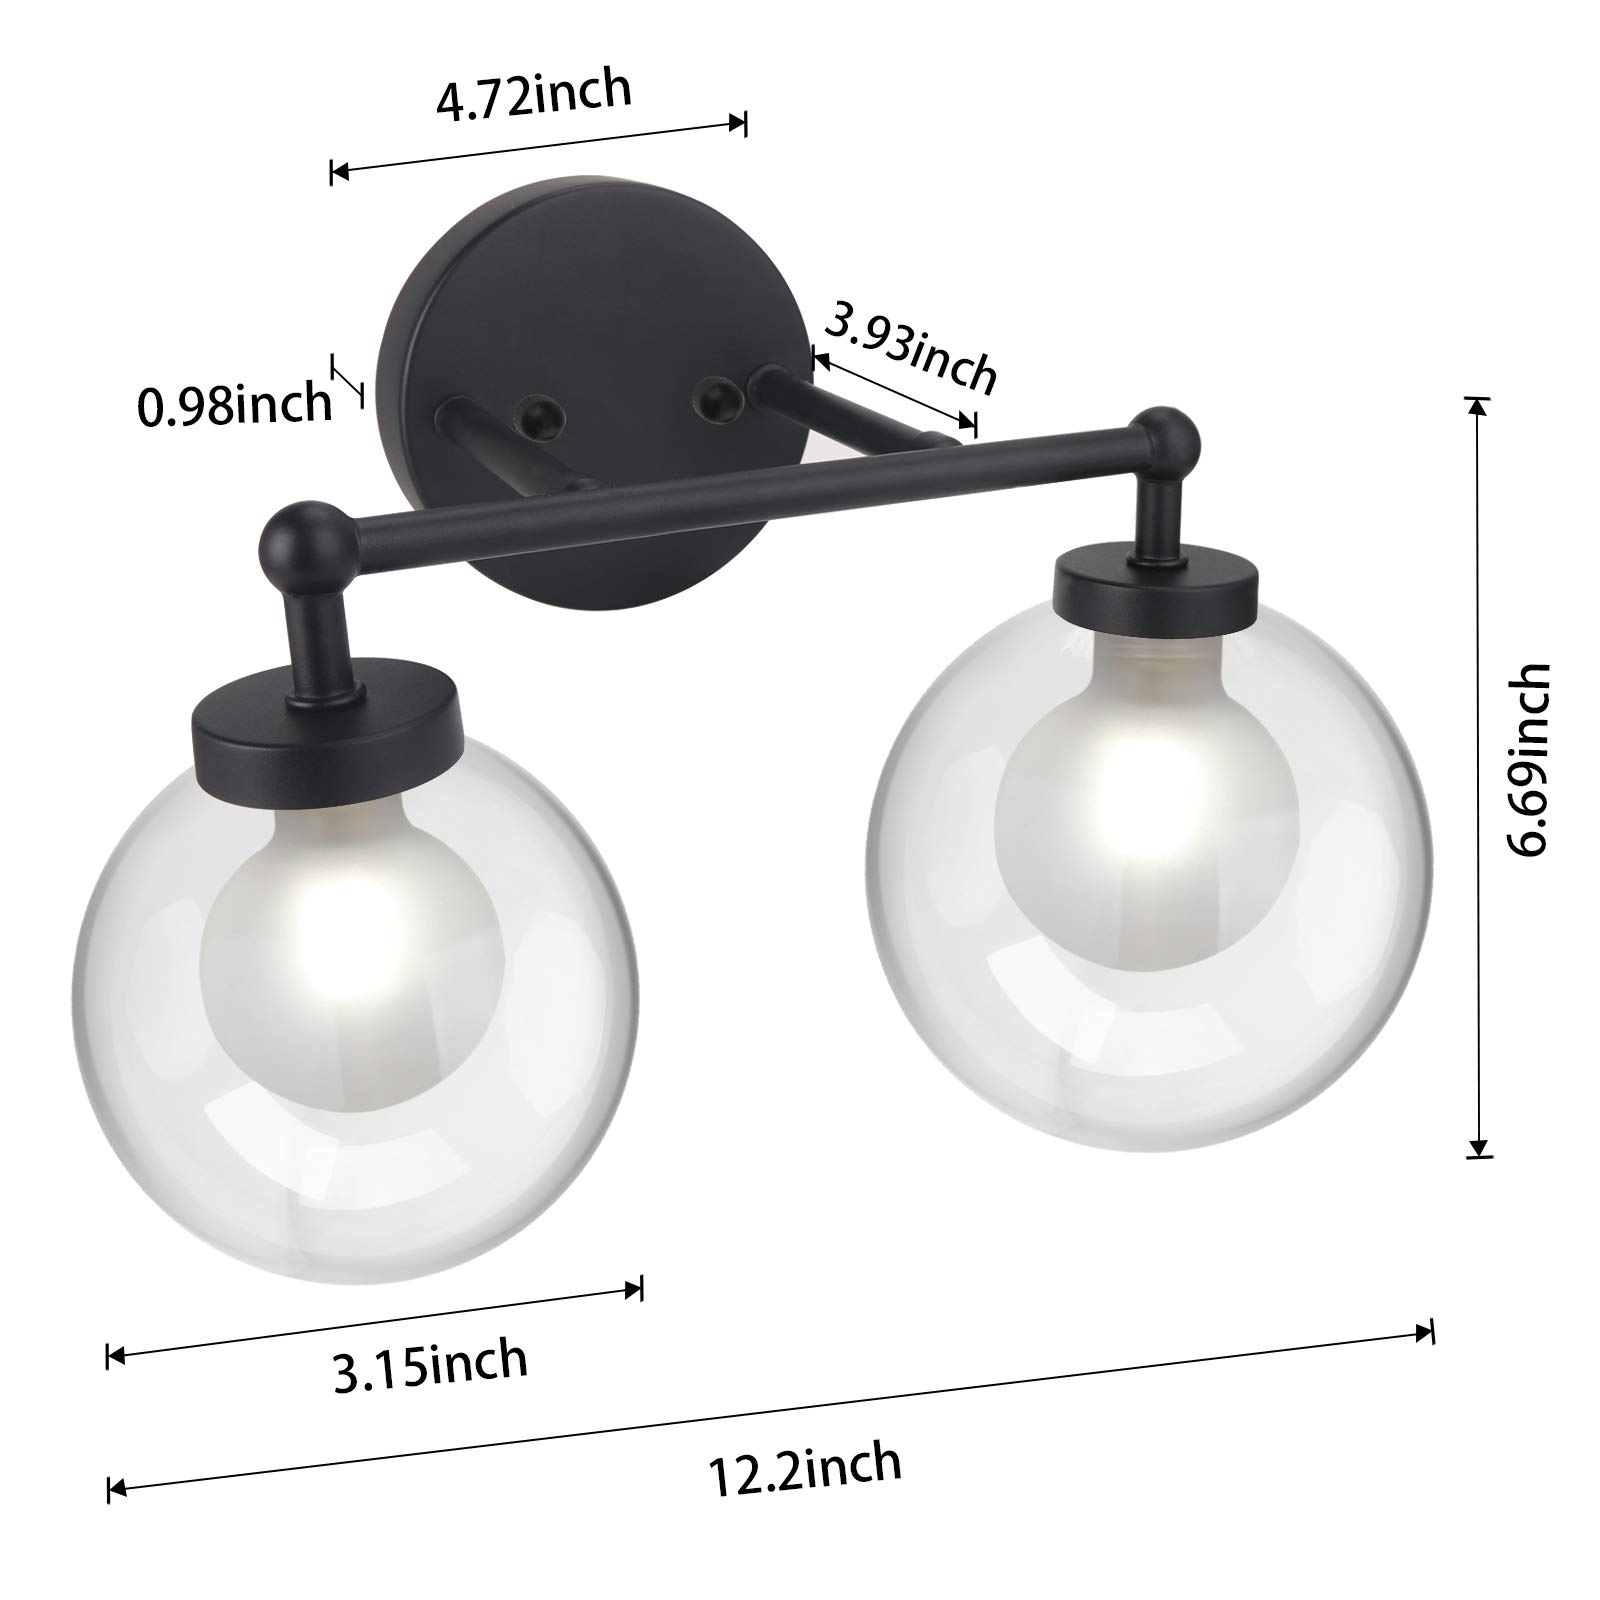 Bathroom Light Fixtures, 2 Light Matte Black Vanity Light Wall Sconce light with 2 G9 Led bulb with Glass Shade, 3.15 Inch 650LM Modern Wall Lamp for Bath Vanity Living Room Hallway Kitchen Bar Stairs